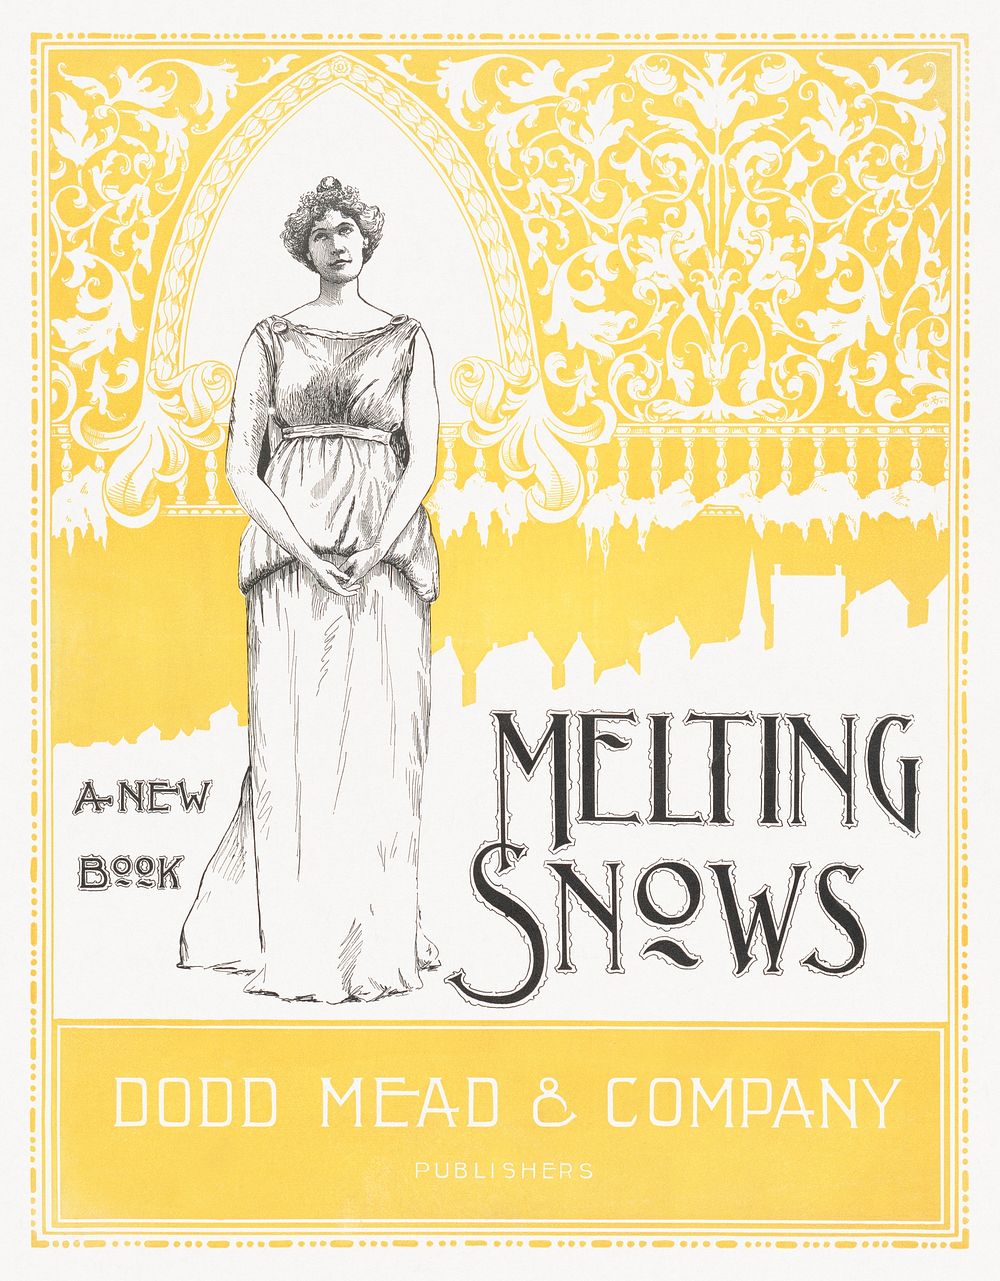 Melting snows, a new book (1895) vintage poster by Dodd, Mead, & Company. Original public domain image from the Library of…